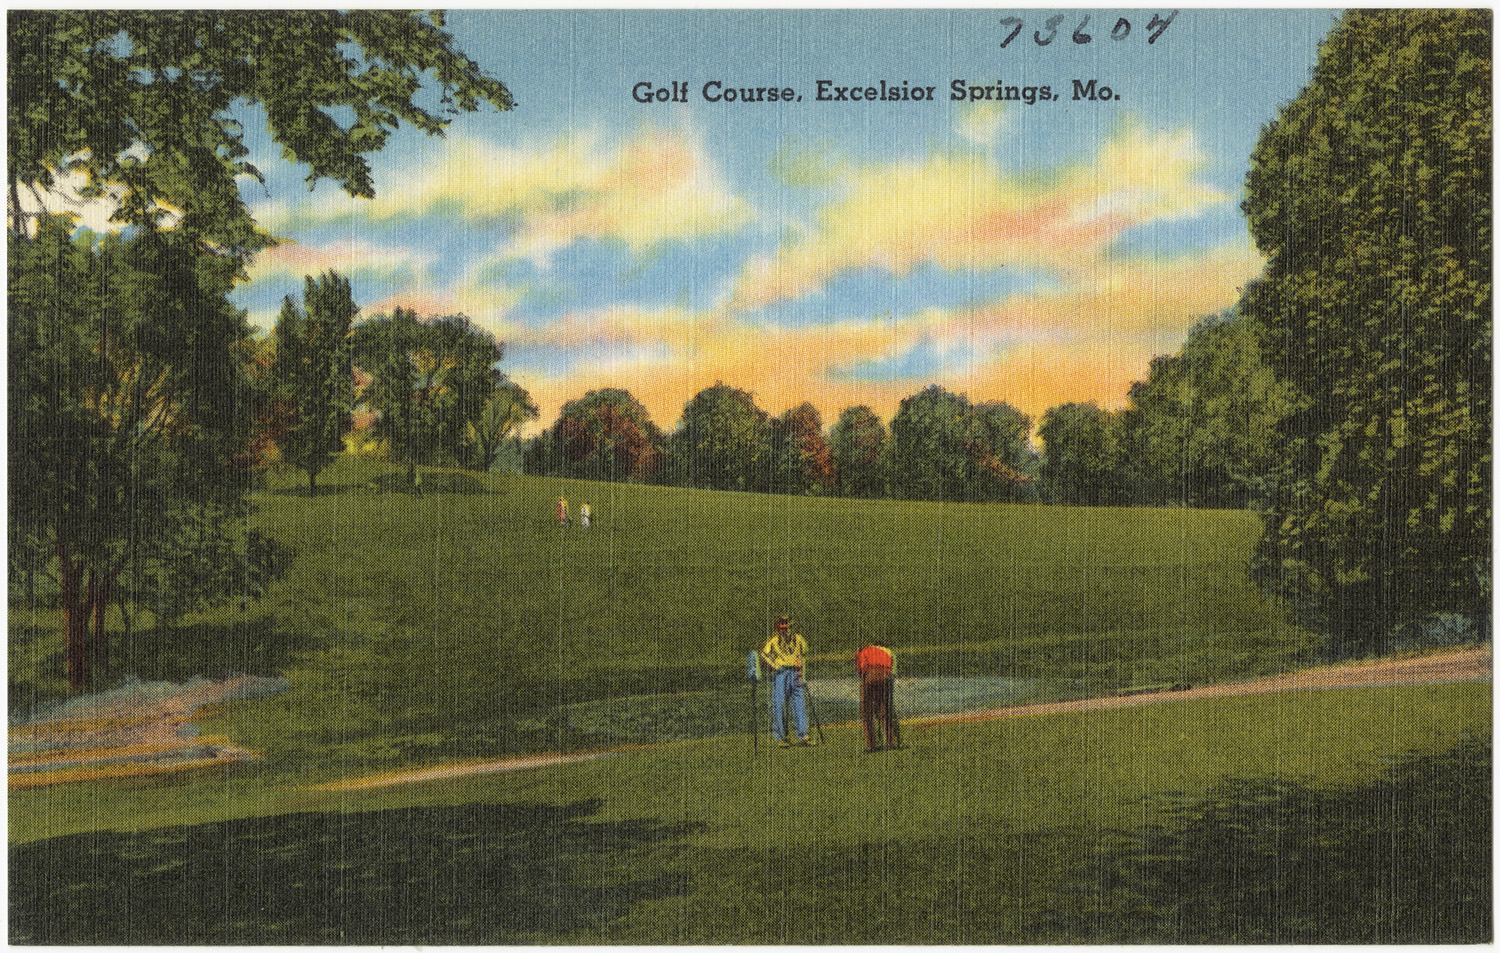 this postcard features people walking in the distance